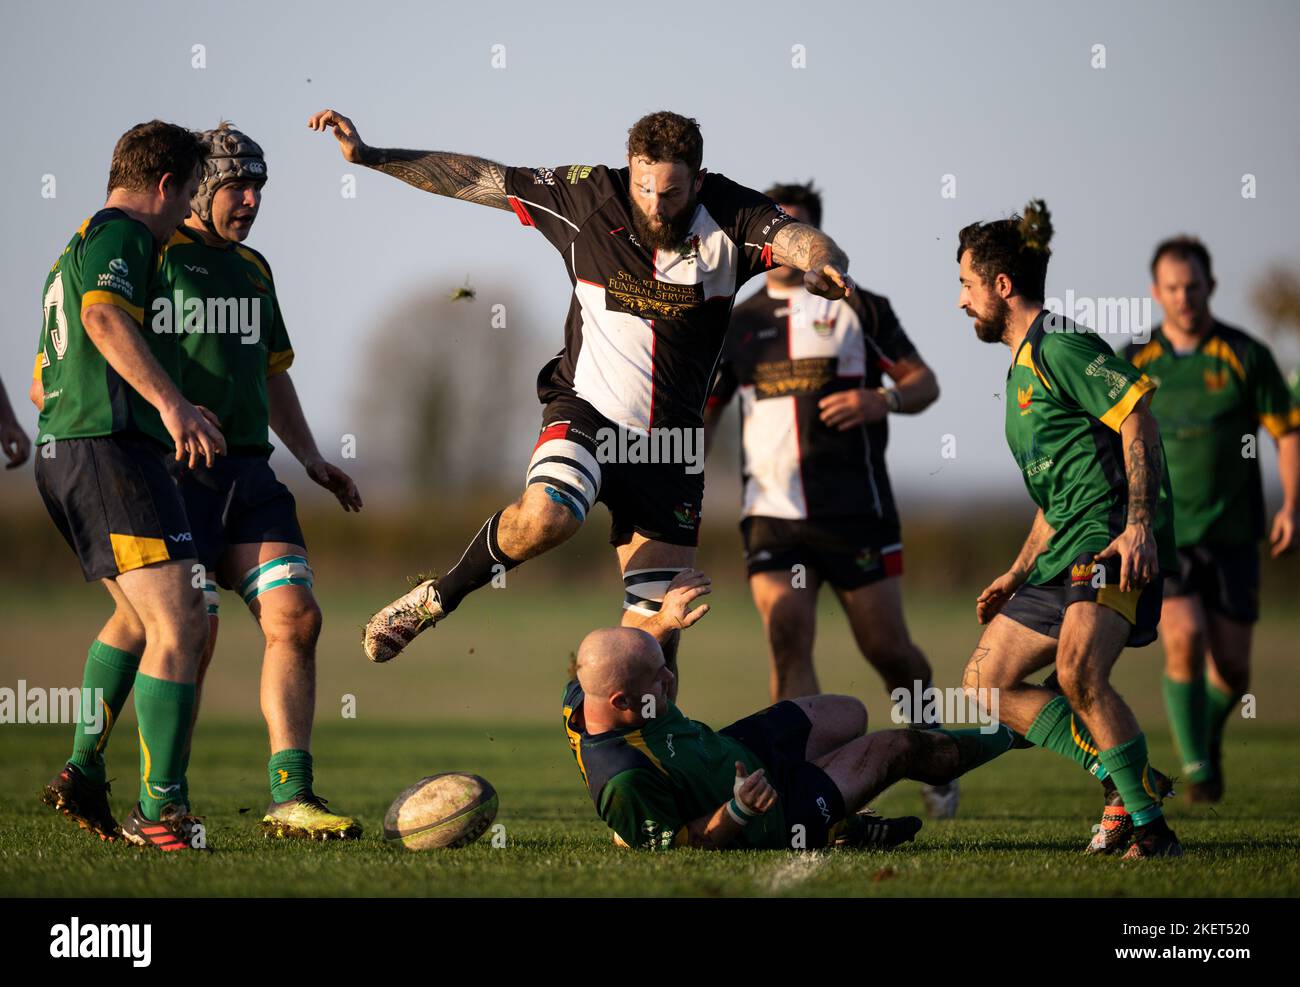 Rugby players in action. Dorset, England, United Kingdom. Stock Photo